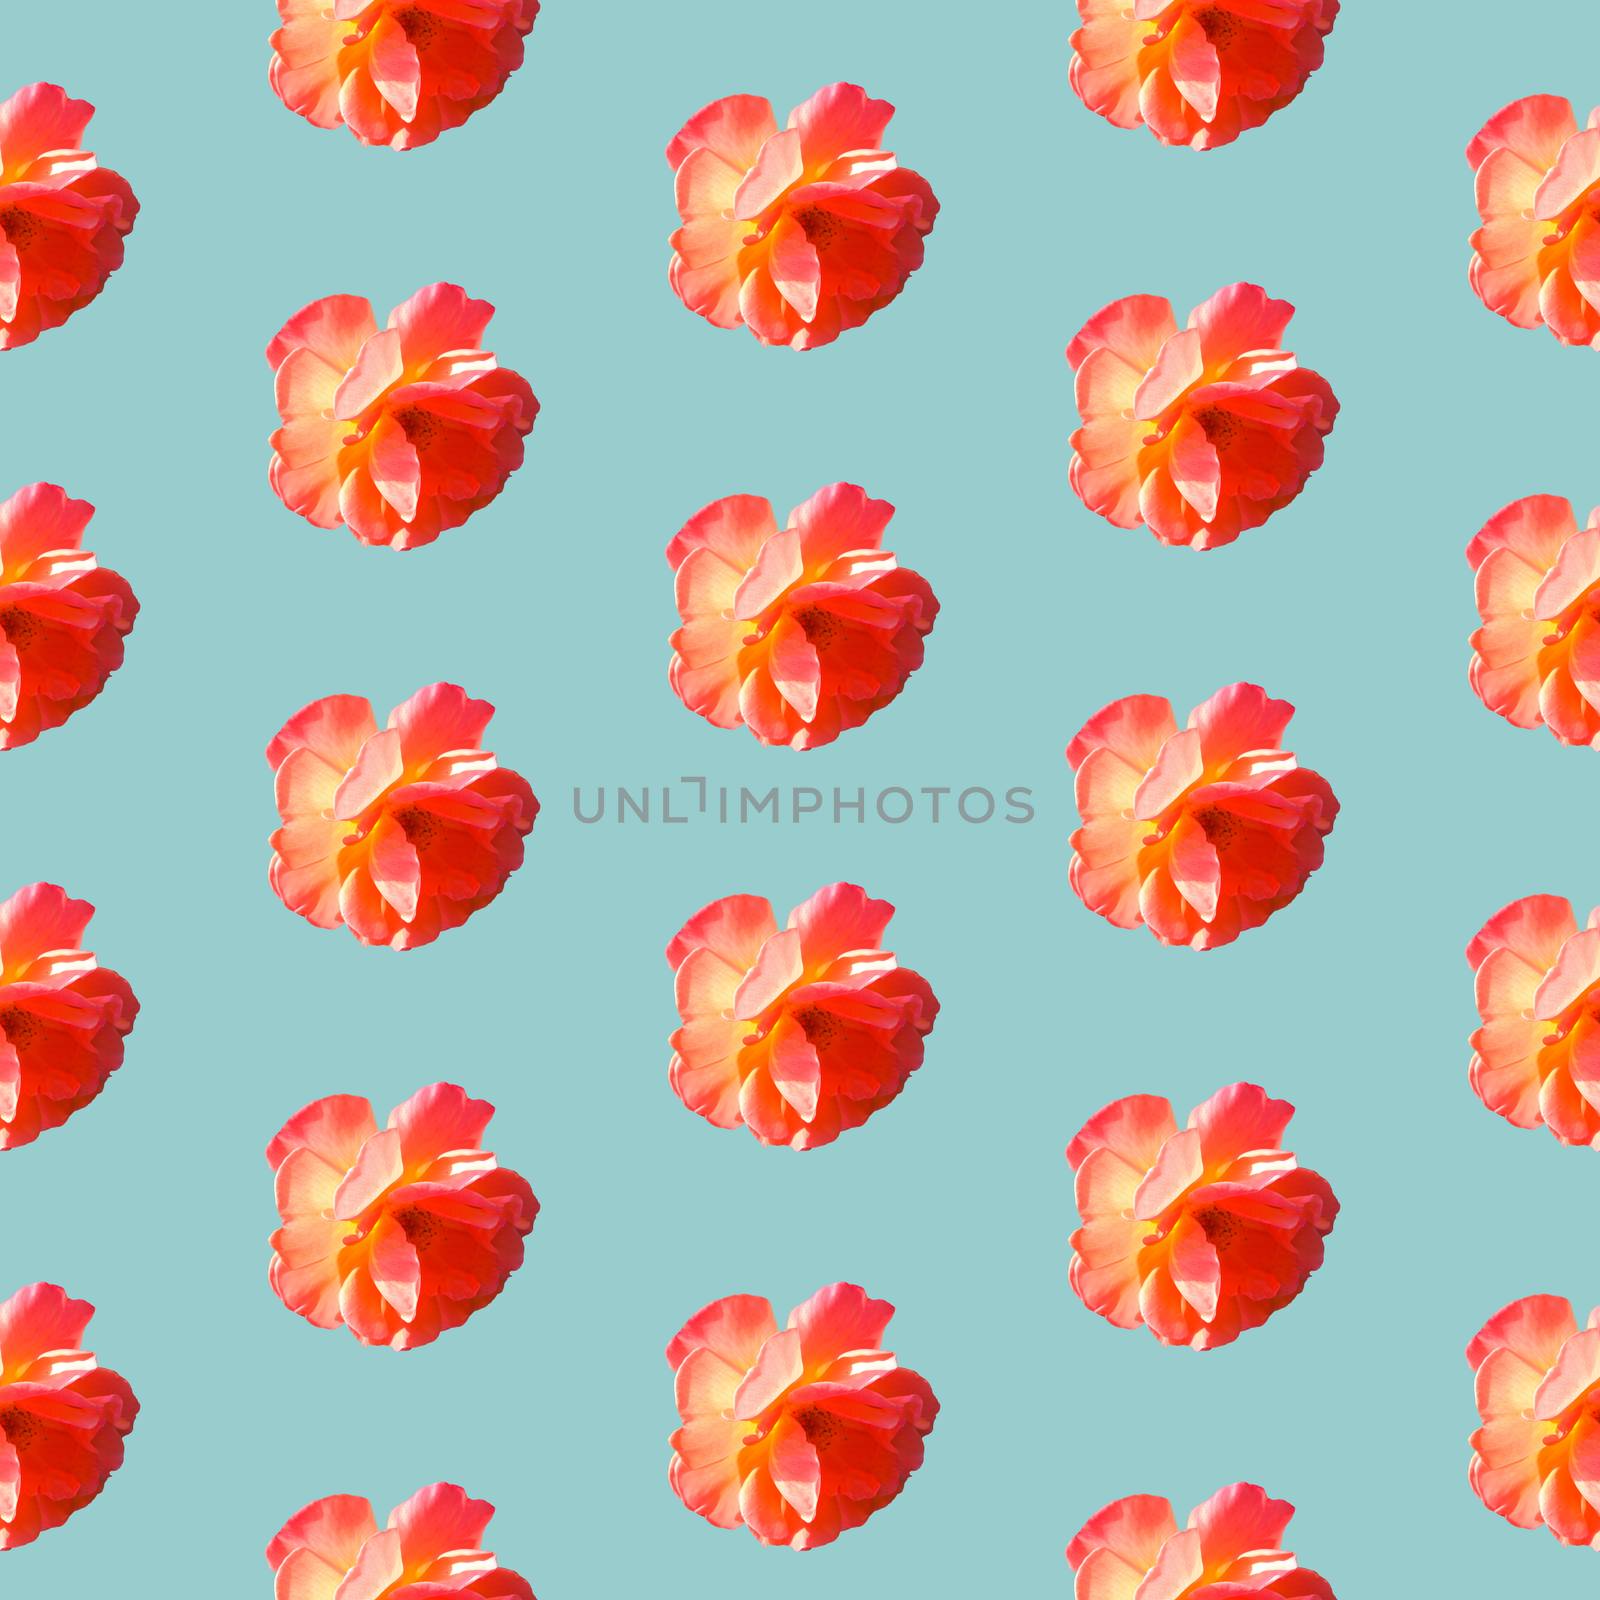 Seamless pattern with roses on a light gray-blue background. Flat lay, top view. Pop art creative design for textile, fashion, wallpaper, fabric, wrapping paper.